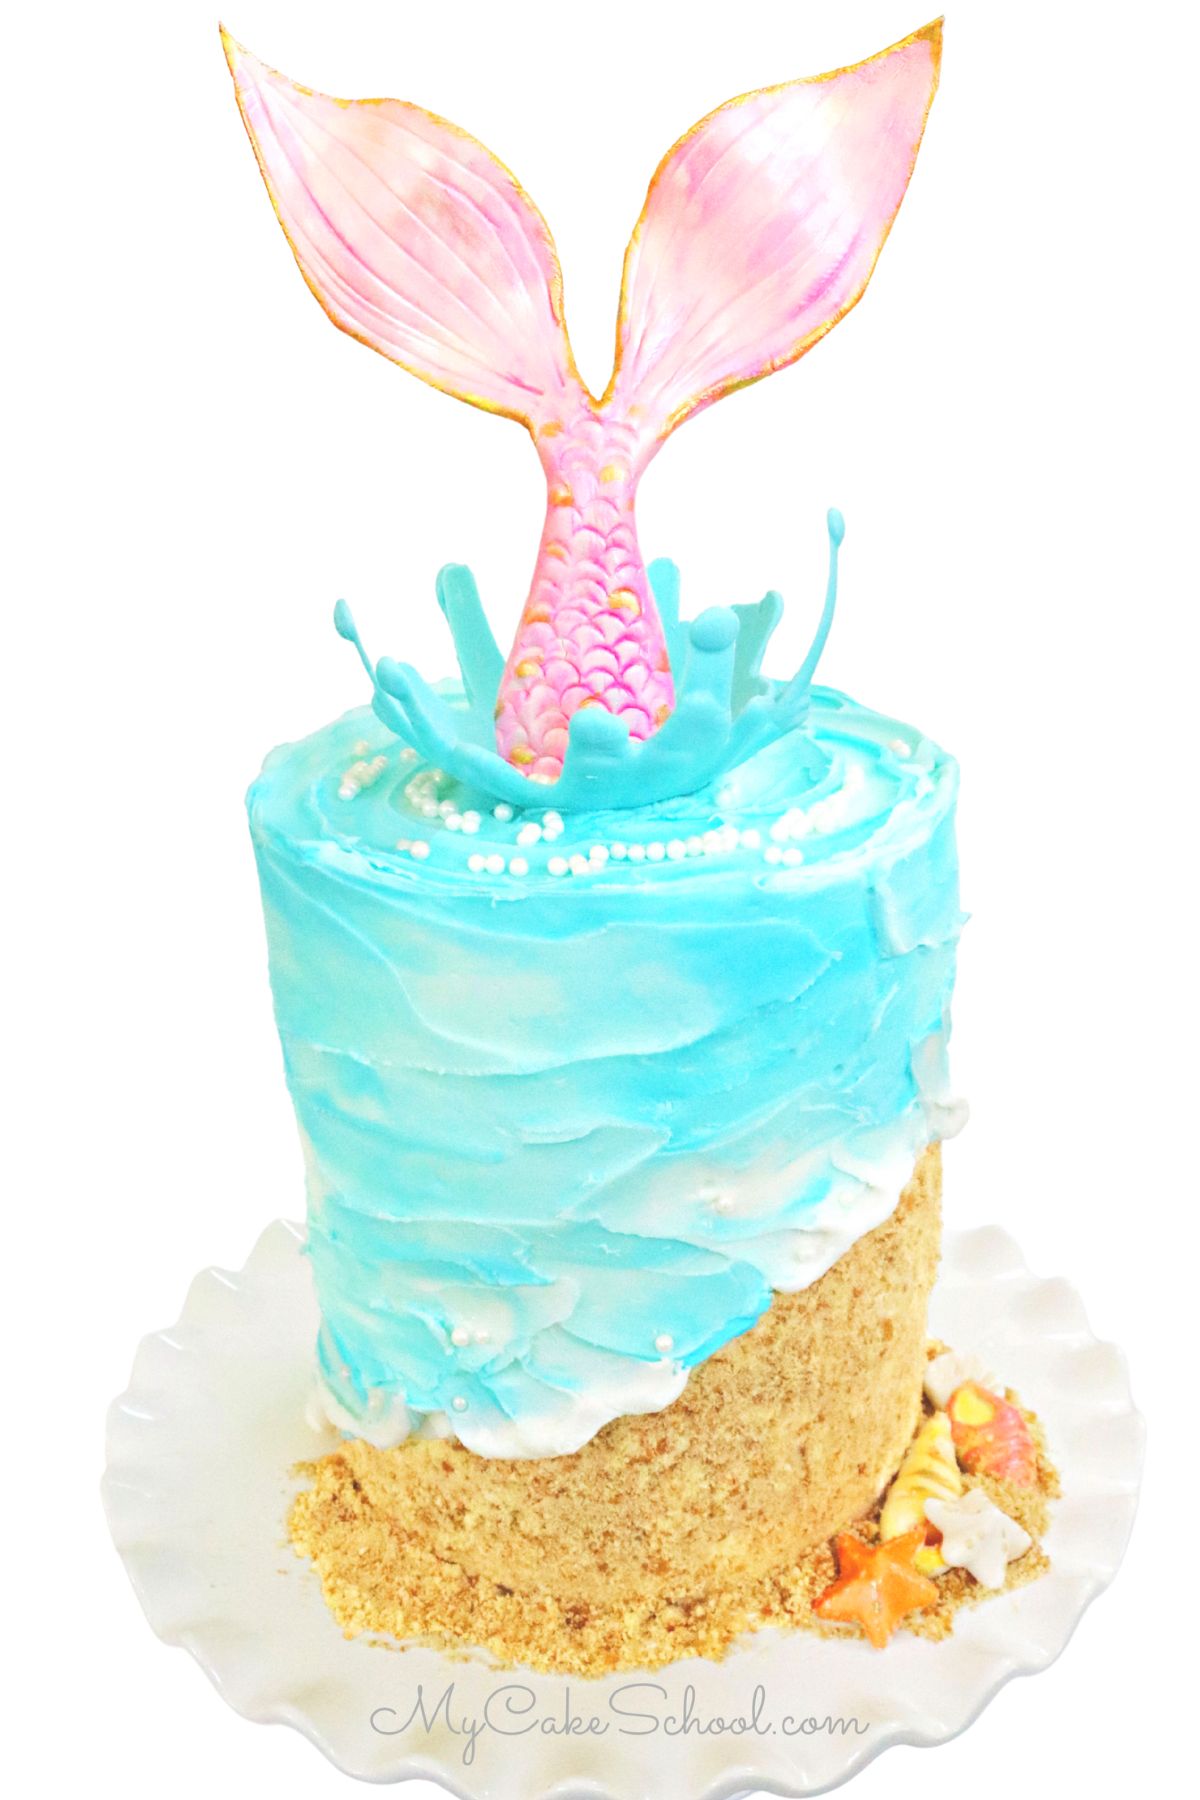 Mermaid Cake, featuring a mermaid tail cake topper in fondant, resting on white pedestal.